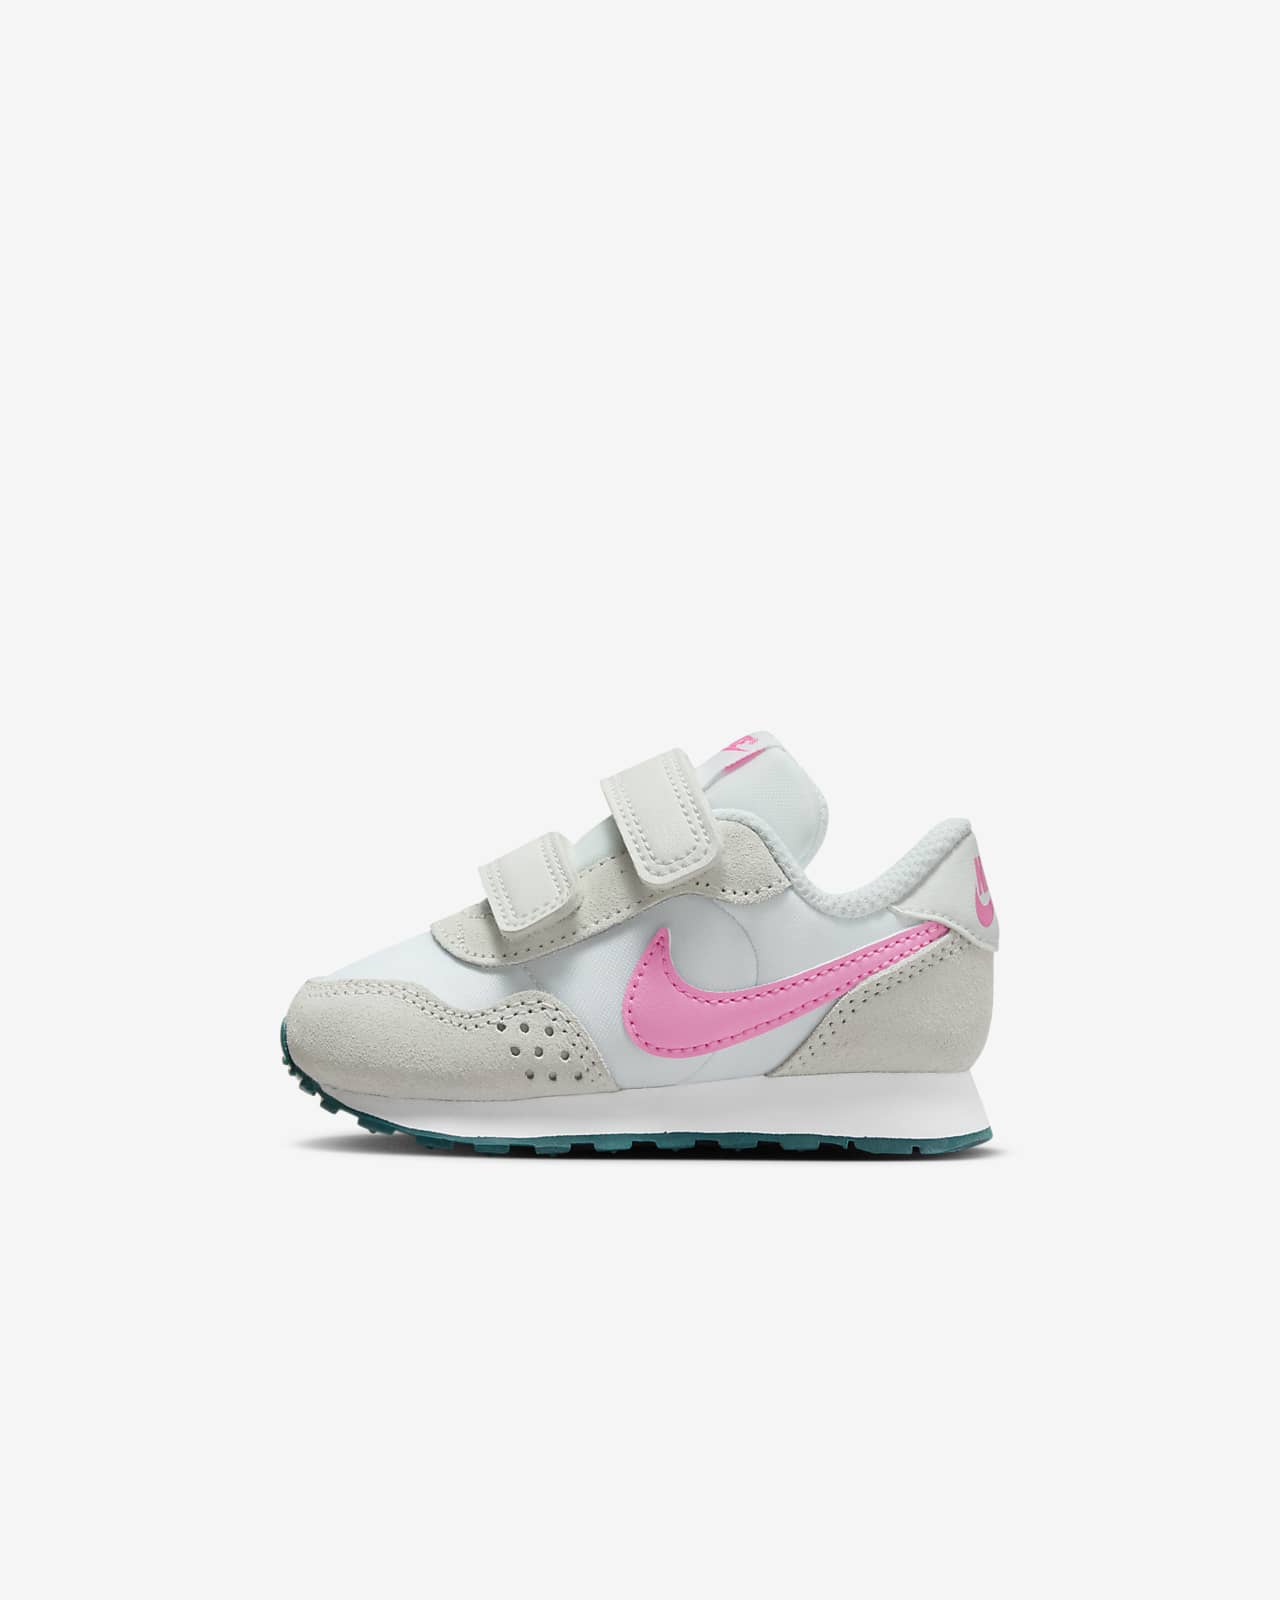 and Toddler Valiant Shoe. Baby Nike Nike MD ID